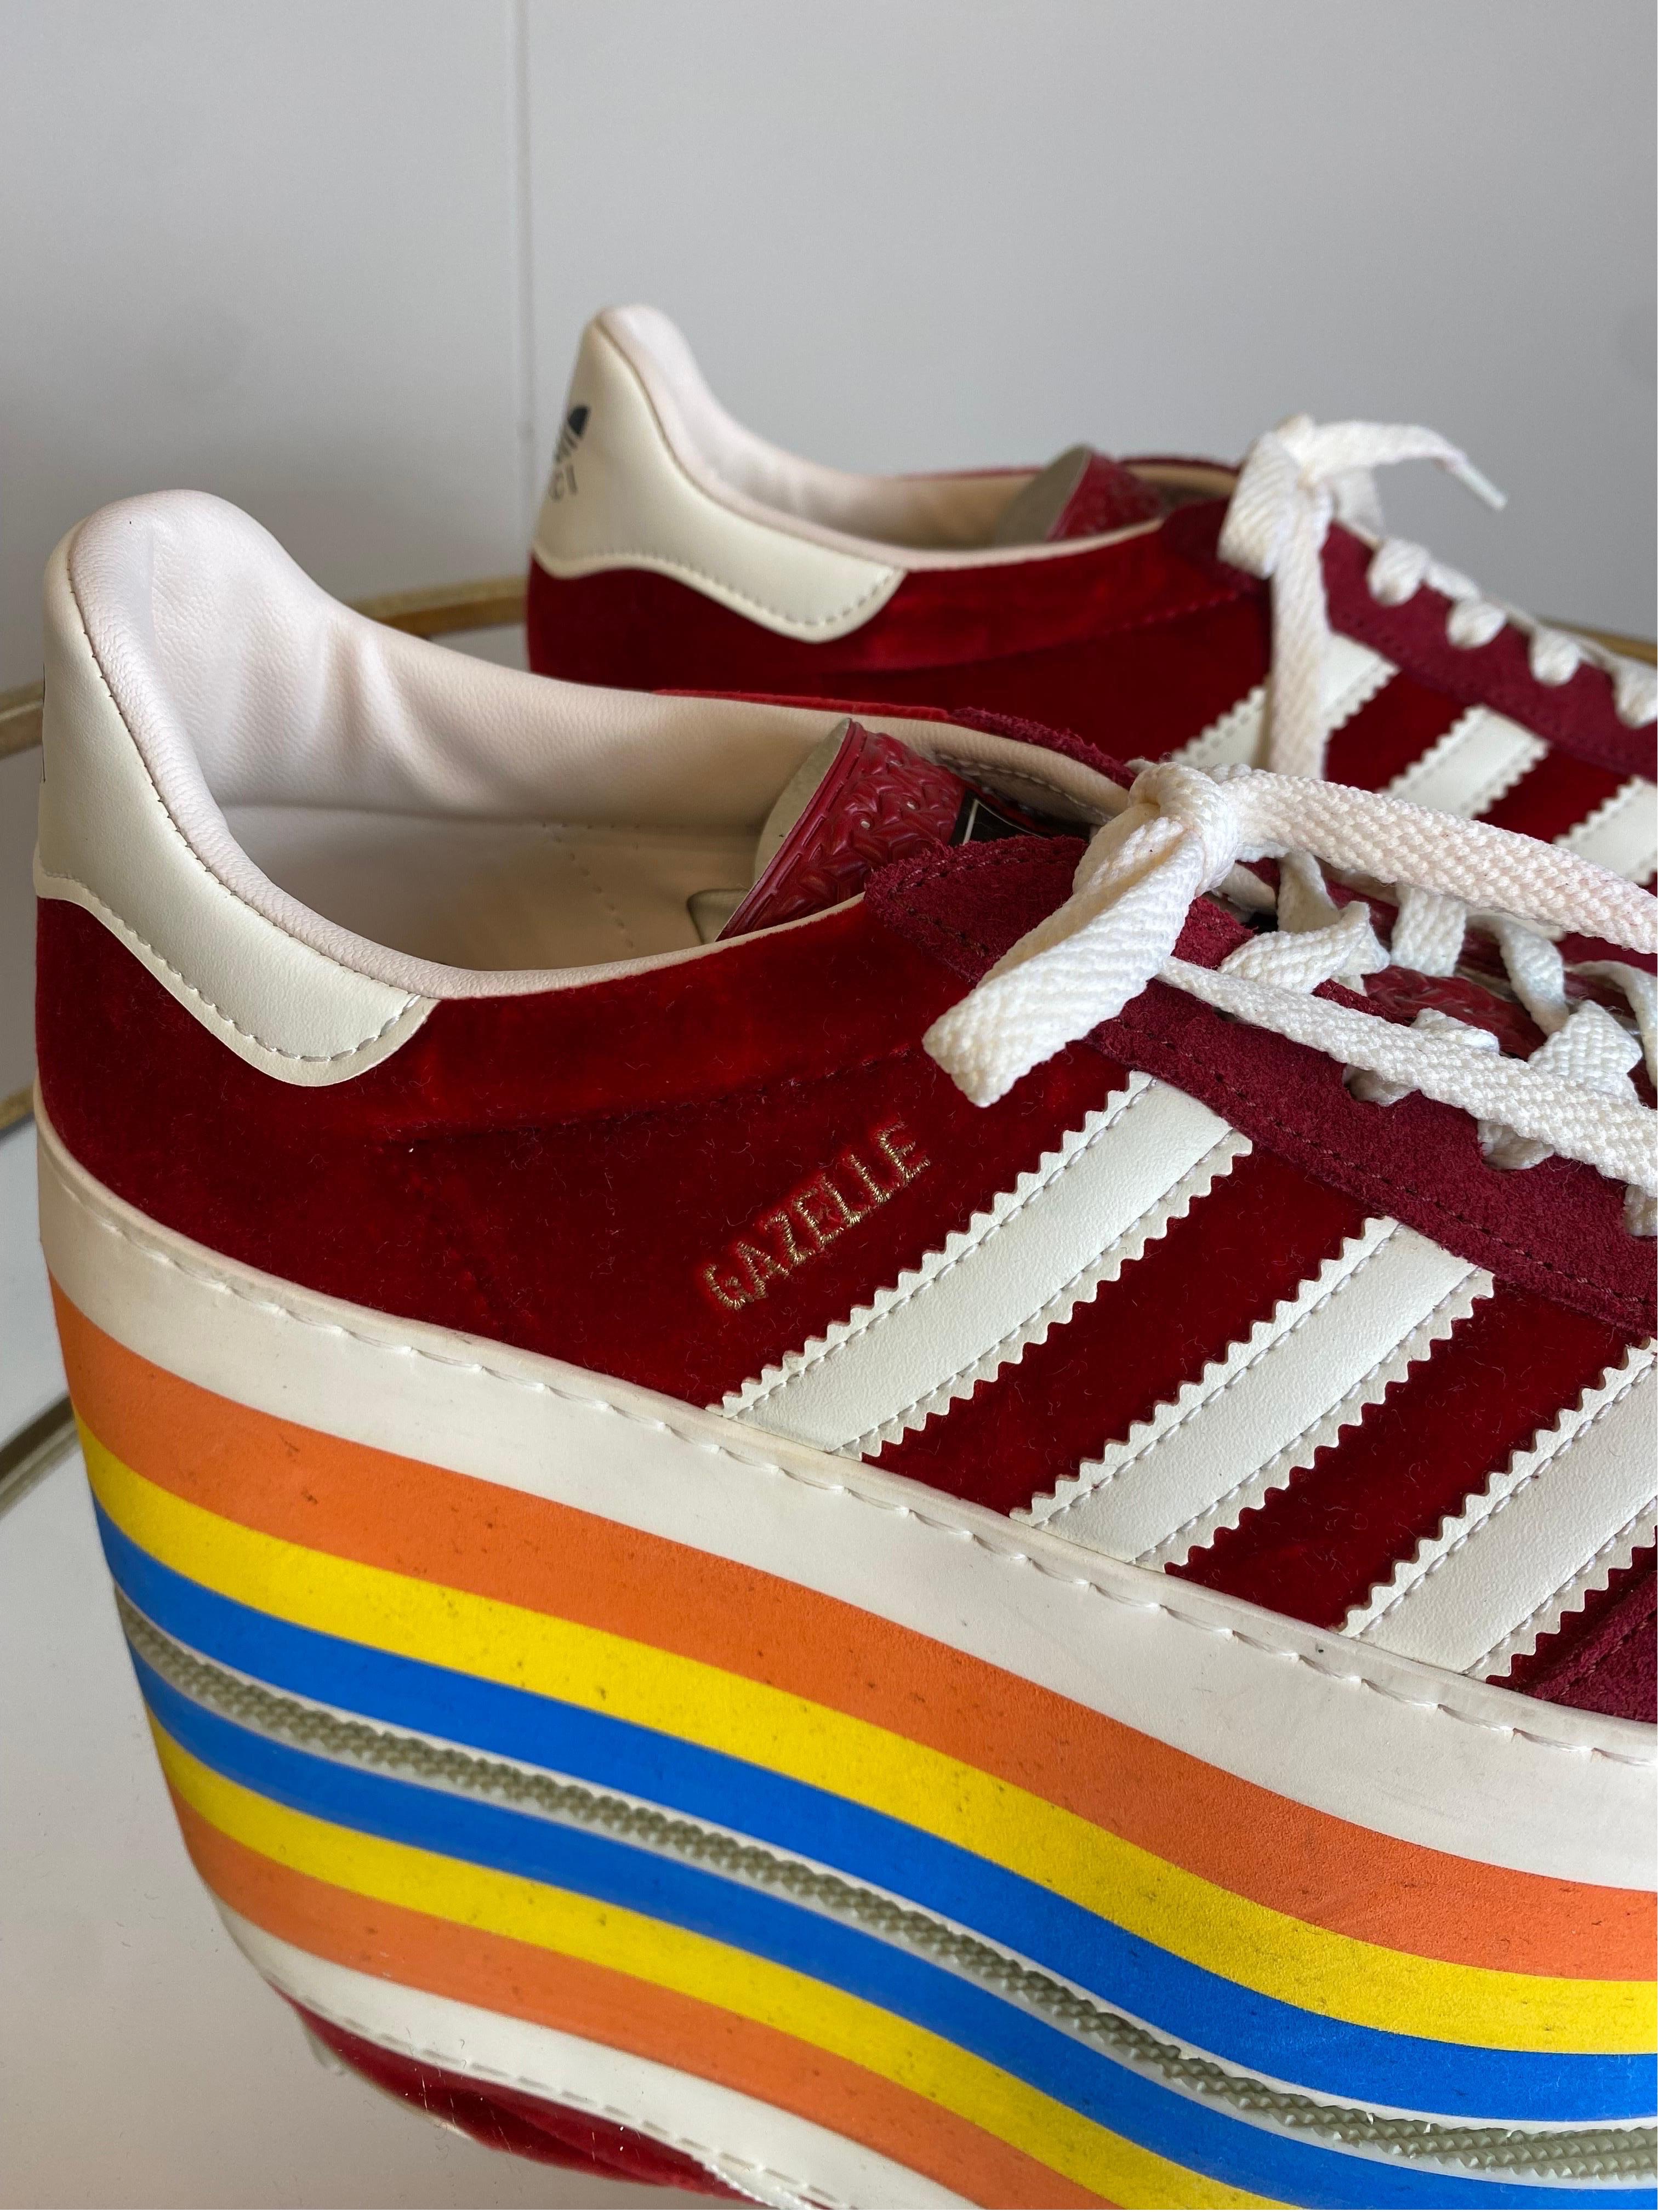 Adidas X Gucci Gazelle sneakers.
In leather, velvet and suede.
Rainbow sole.
Number 40 and a half French.
Inner sole 26 cm
Plateau 8 cm
New, never used.